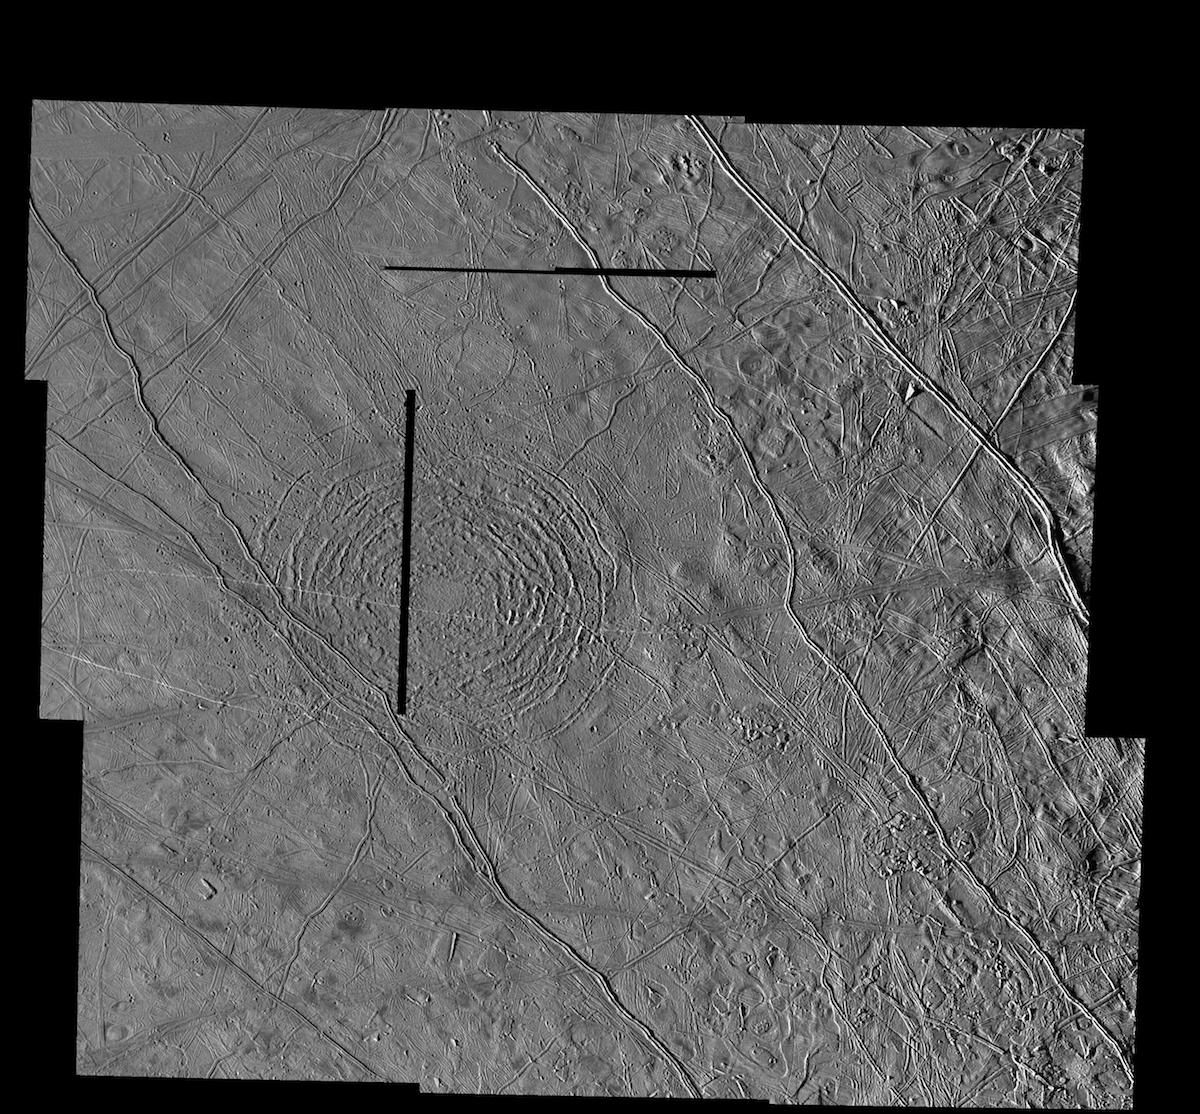 The Tyre Multi-ring Structure on Europa – NASA's Europa Clipper